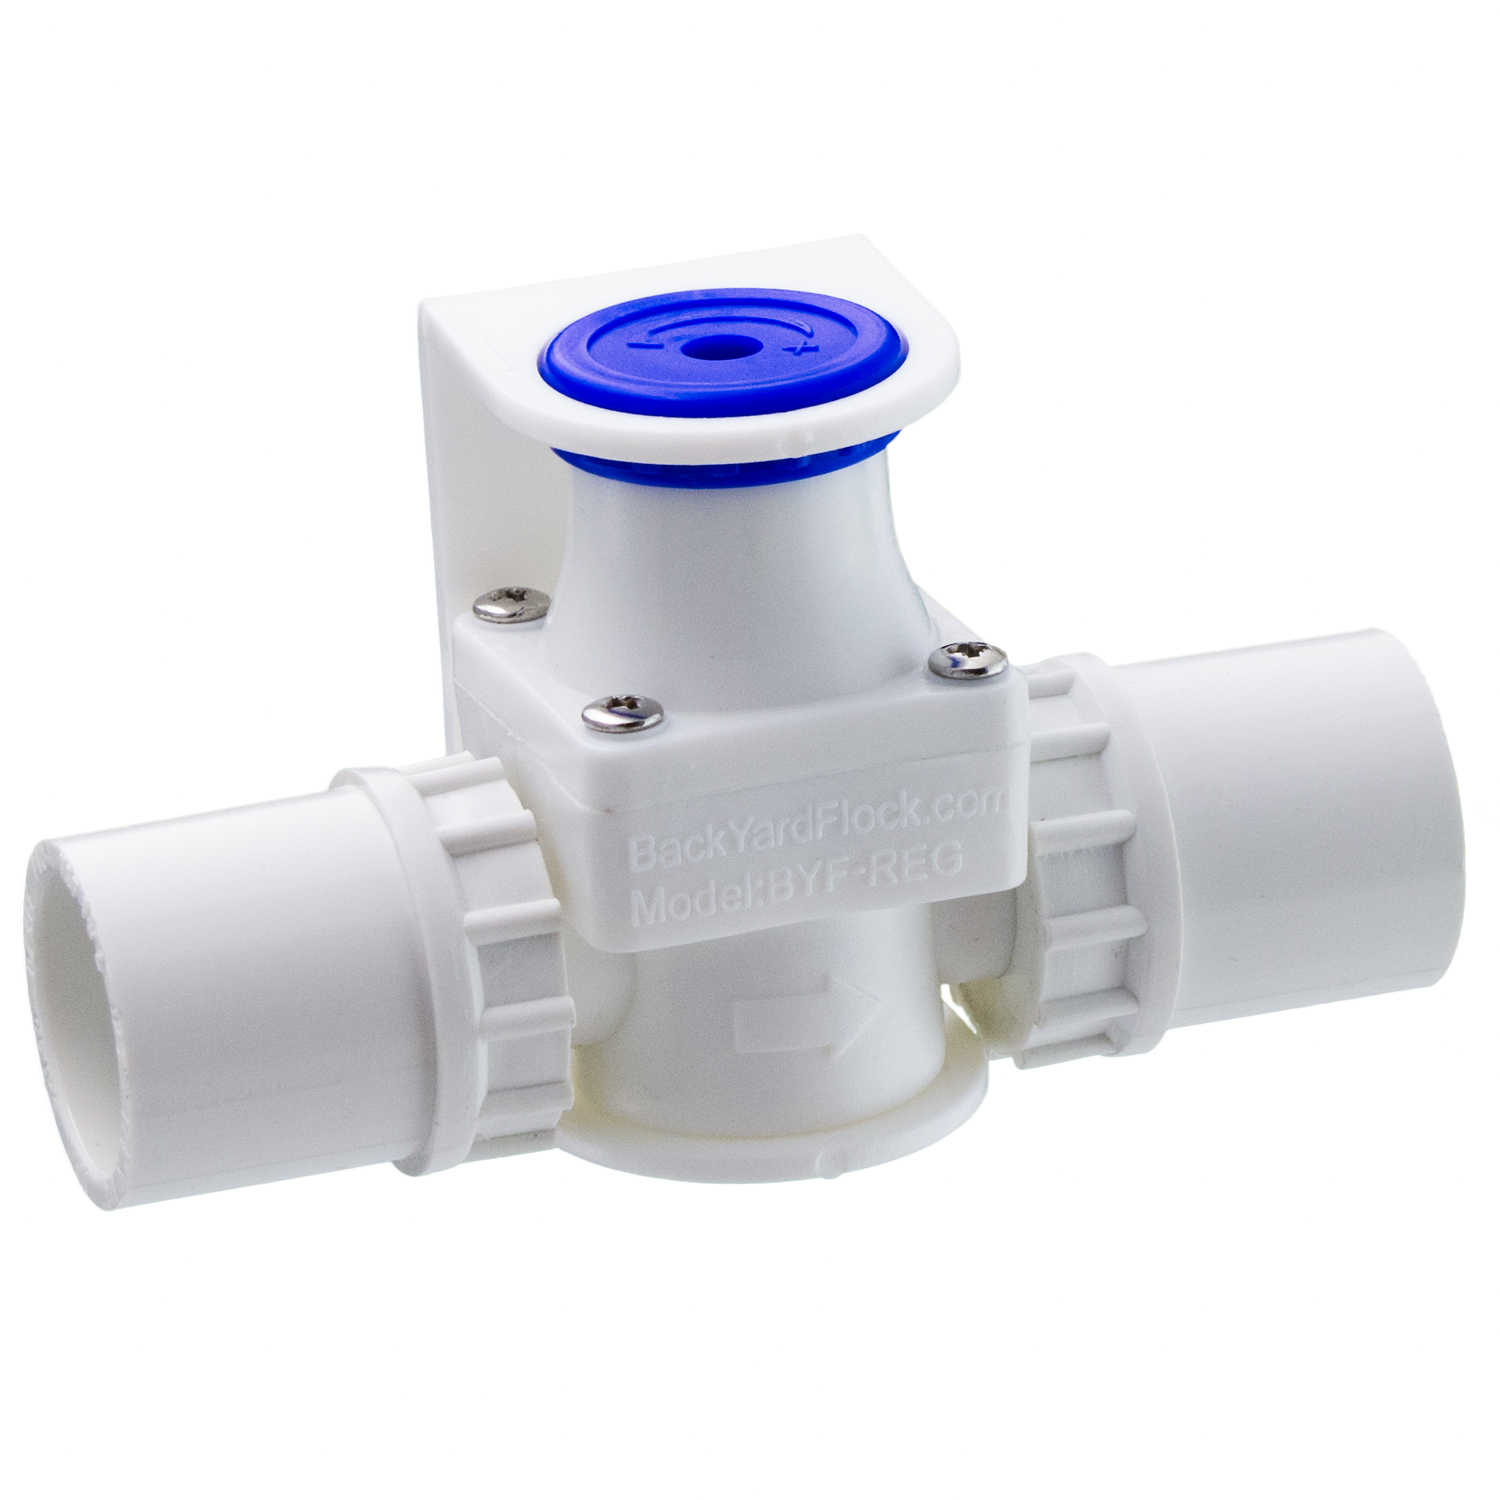 PRESSURE REGULATOR for Backyard Flock Automatic Poultry Watering System